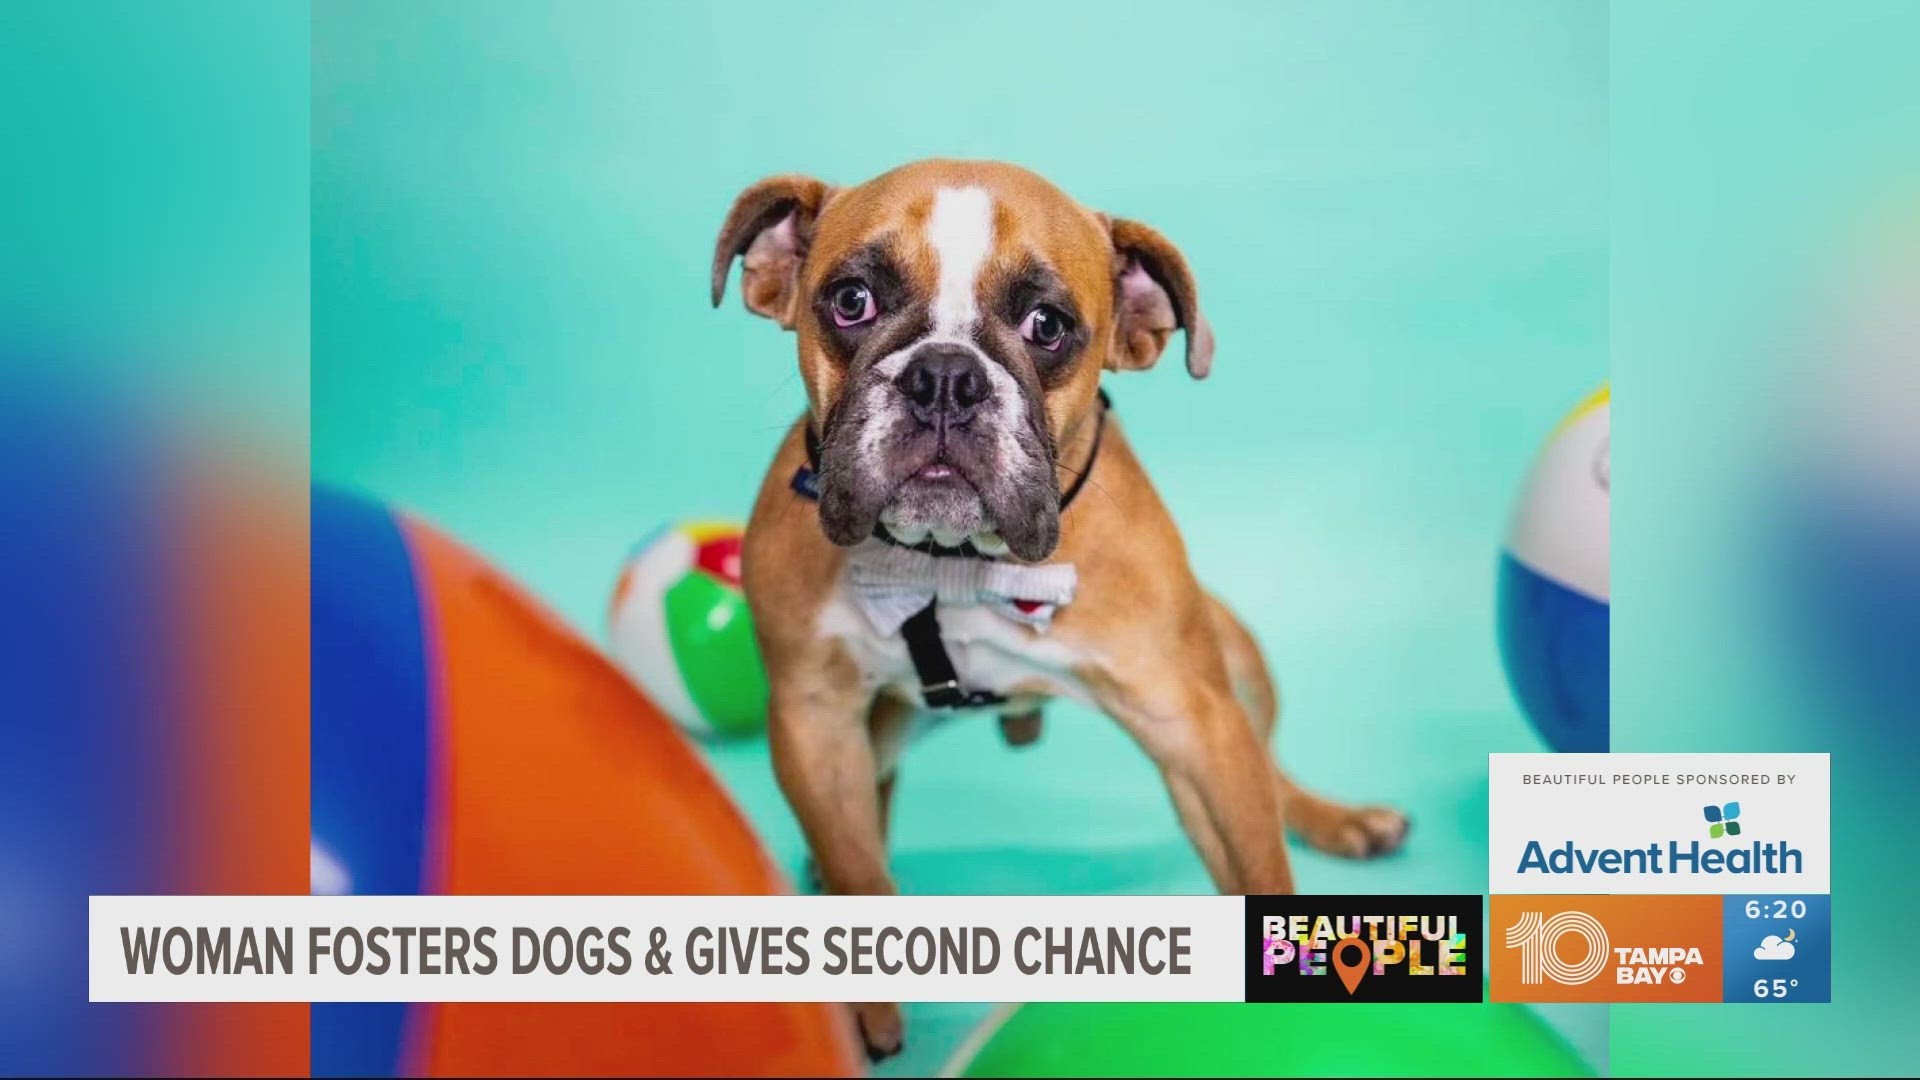 Karey Burek is a medical foster with the Suncoast Animal League. Get to know her special dogs and the rewards of giving sick animals their best life.